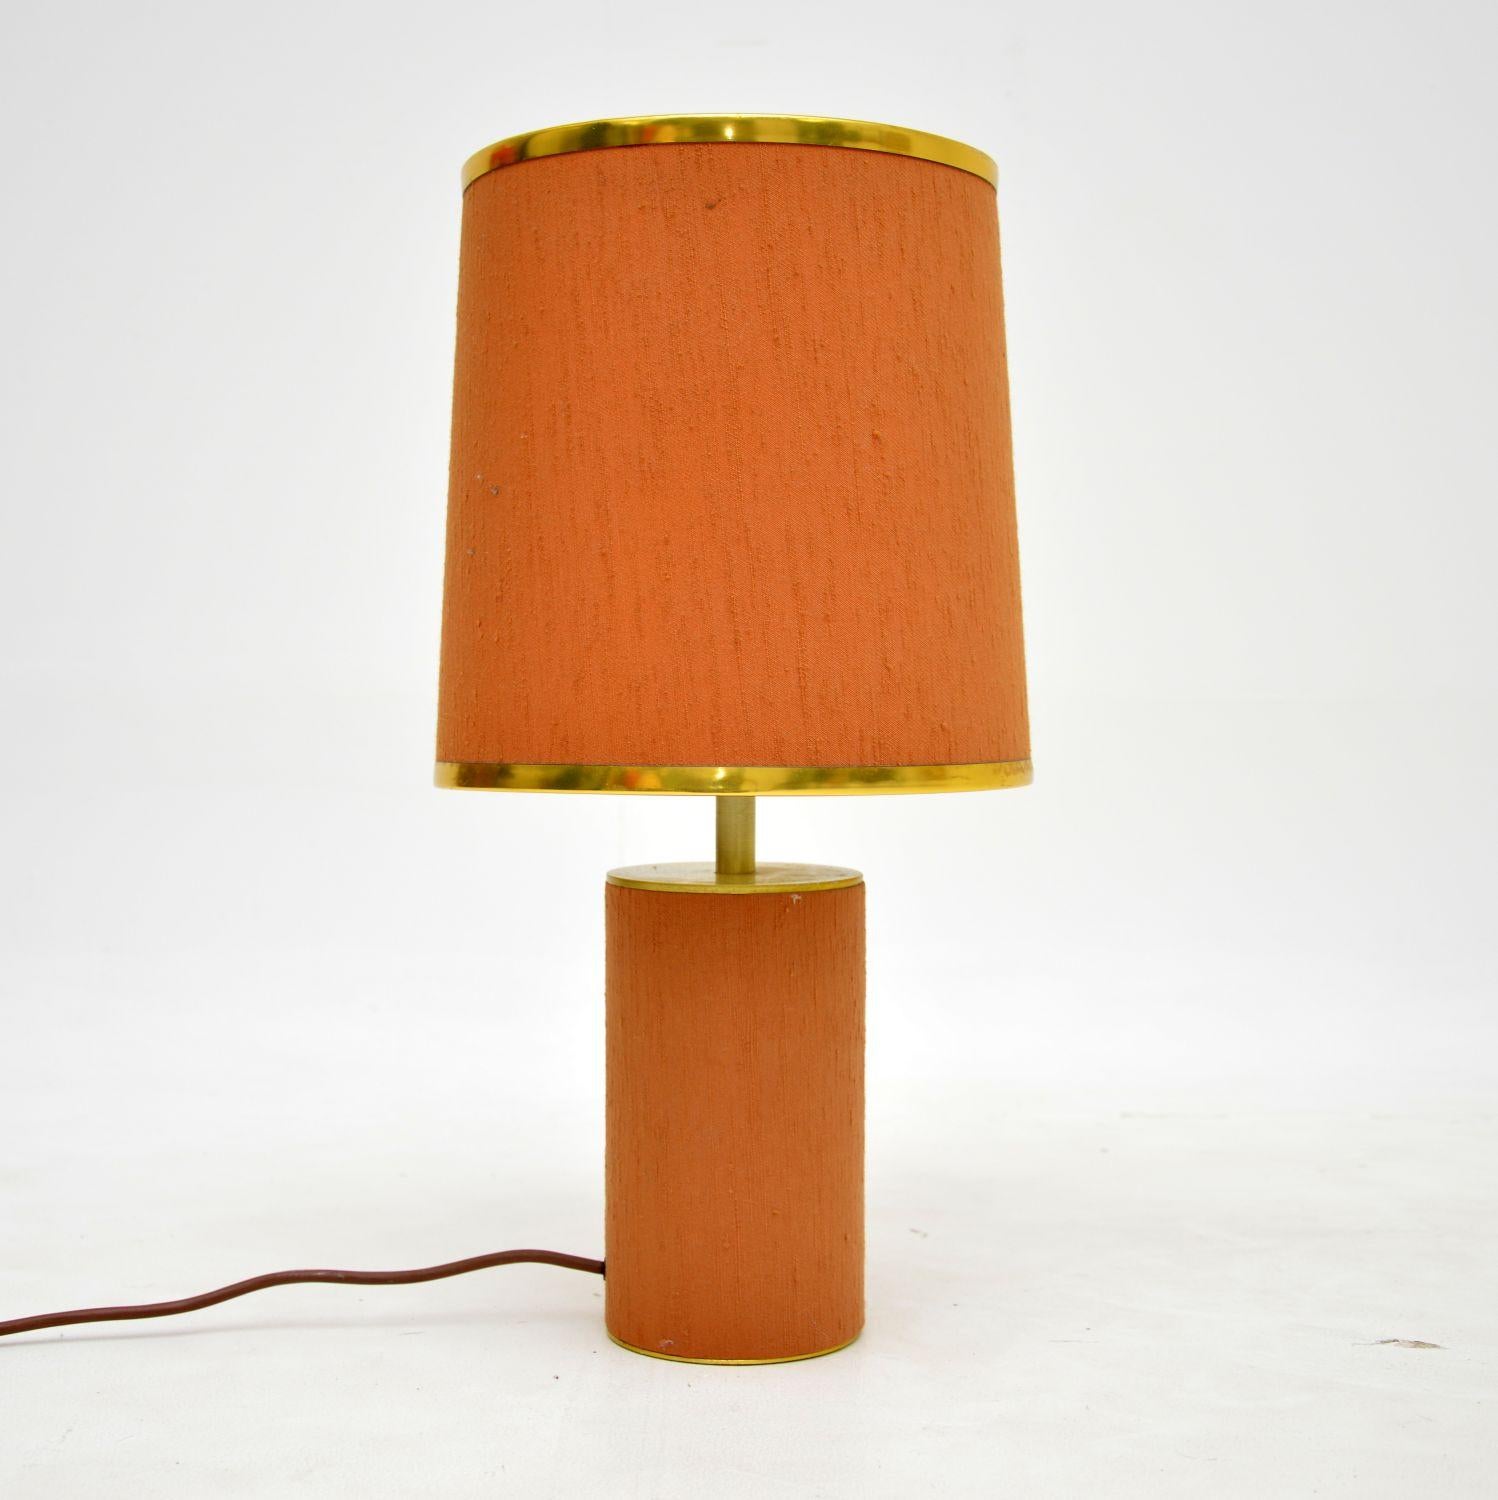 A lovely vintage table lamp in brass, wrapped in peach fabric. This was made in England, it dates from the 1970s.

It is of excellent quality and this has quite an unusual design. It is a lovely size, and would be useful in various positions